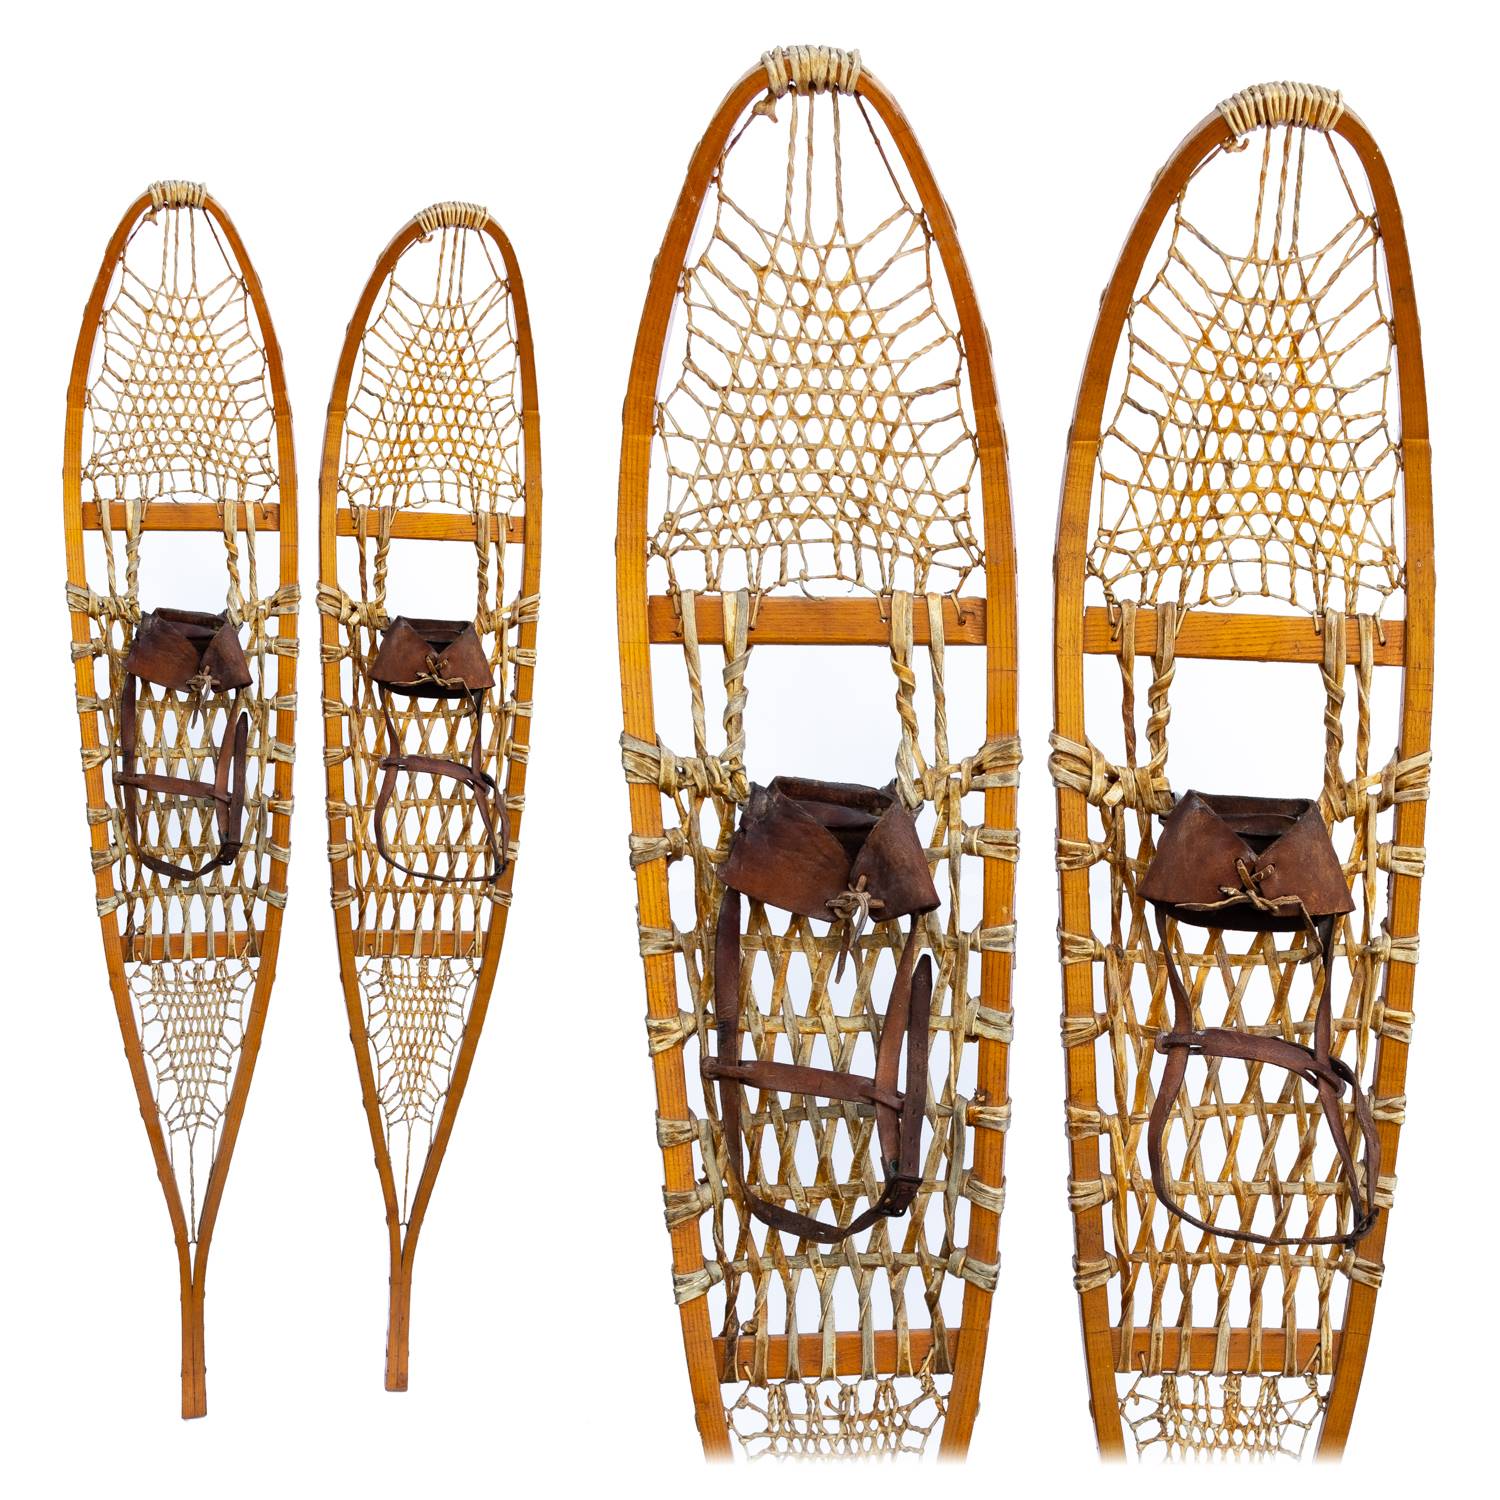 1950s Athabascan Style Traditional Trapper Snowshoes with leather bindings